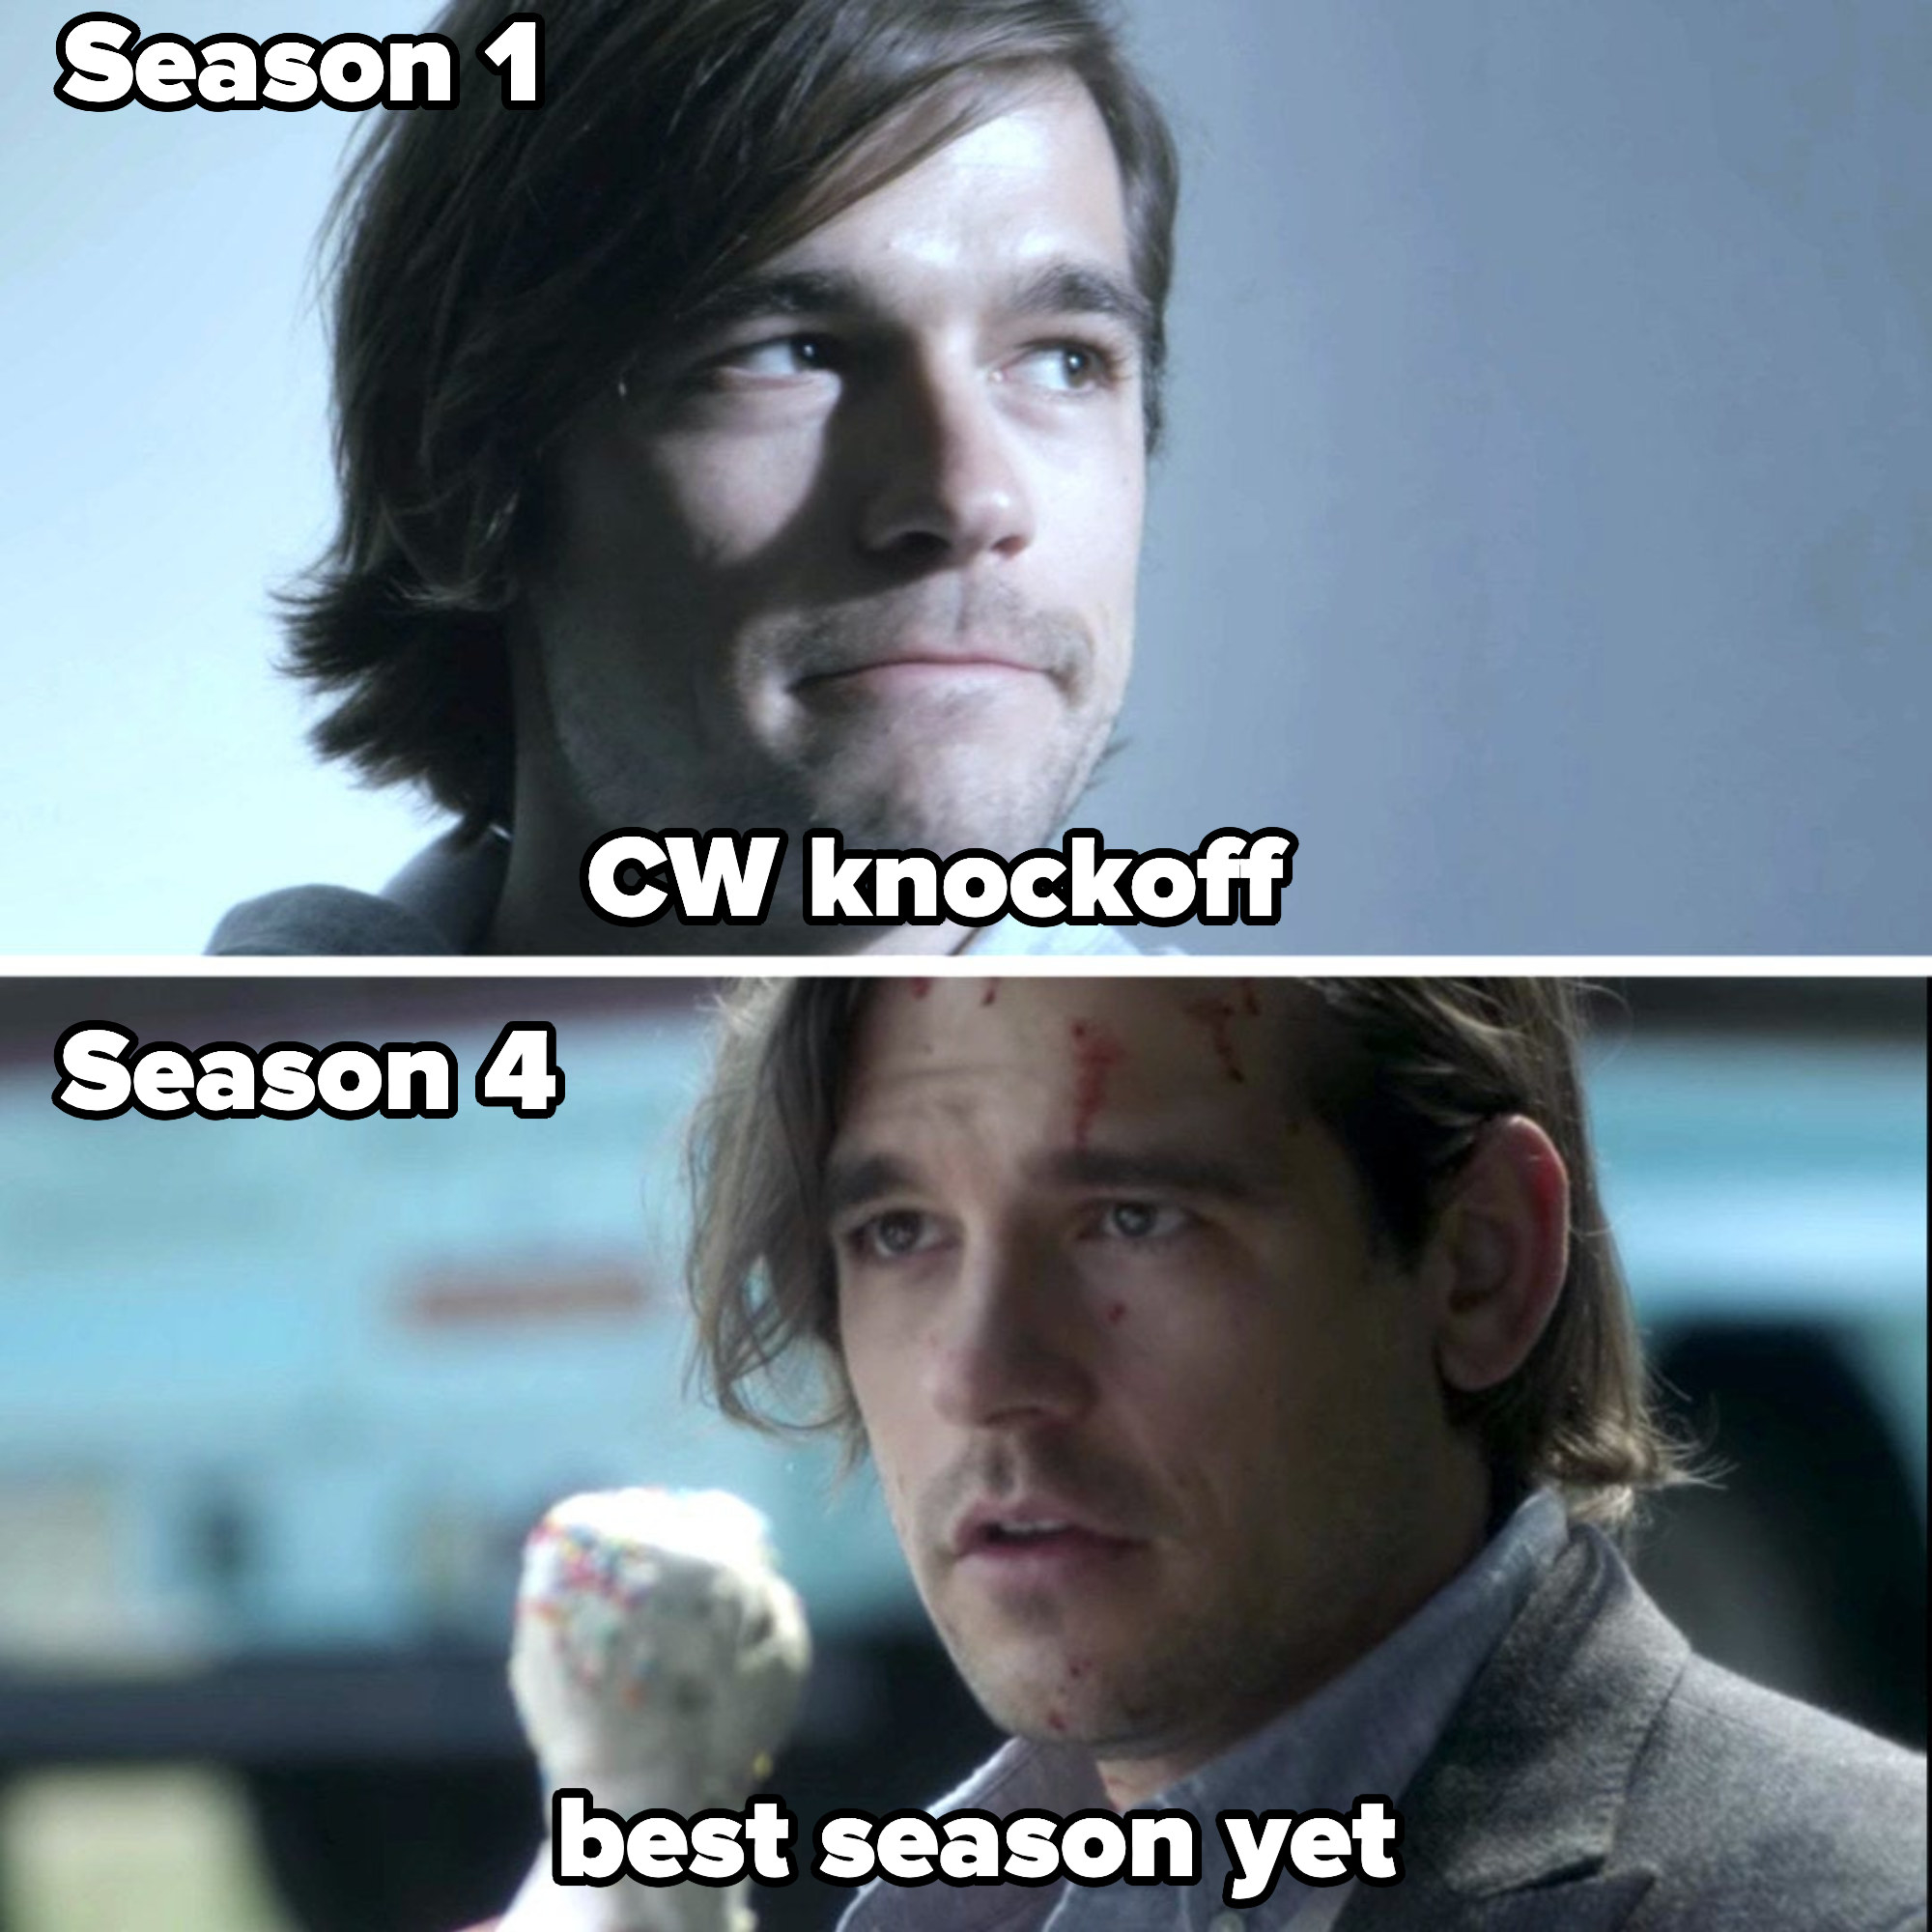 Quentin in season 1 labeled &quot;CW knockoff&quot; and in season 4 labeled &quot;best season yet&quot;